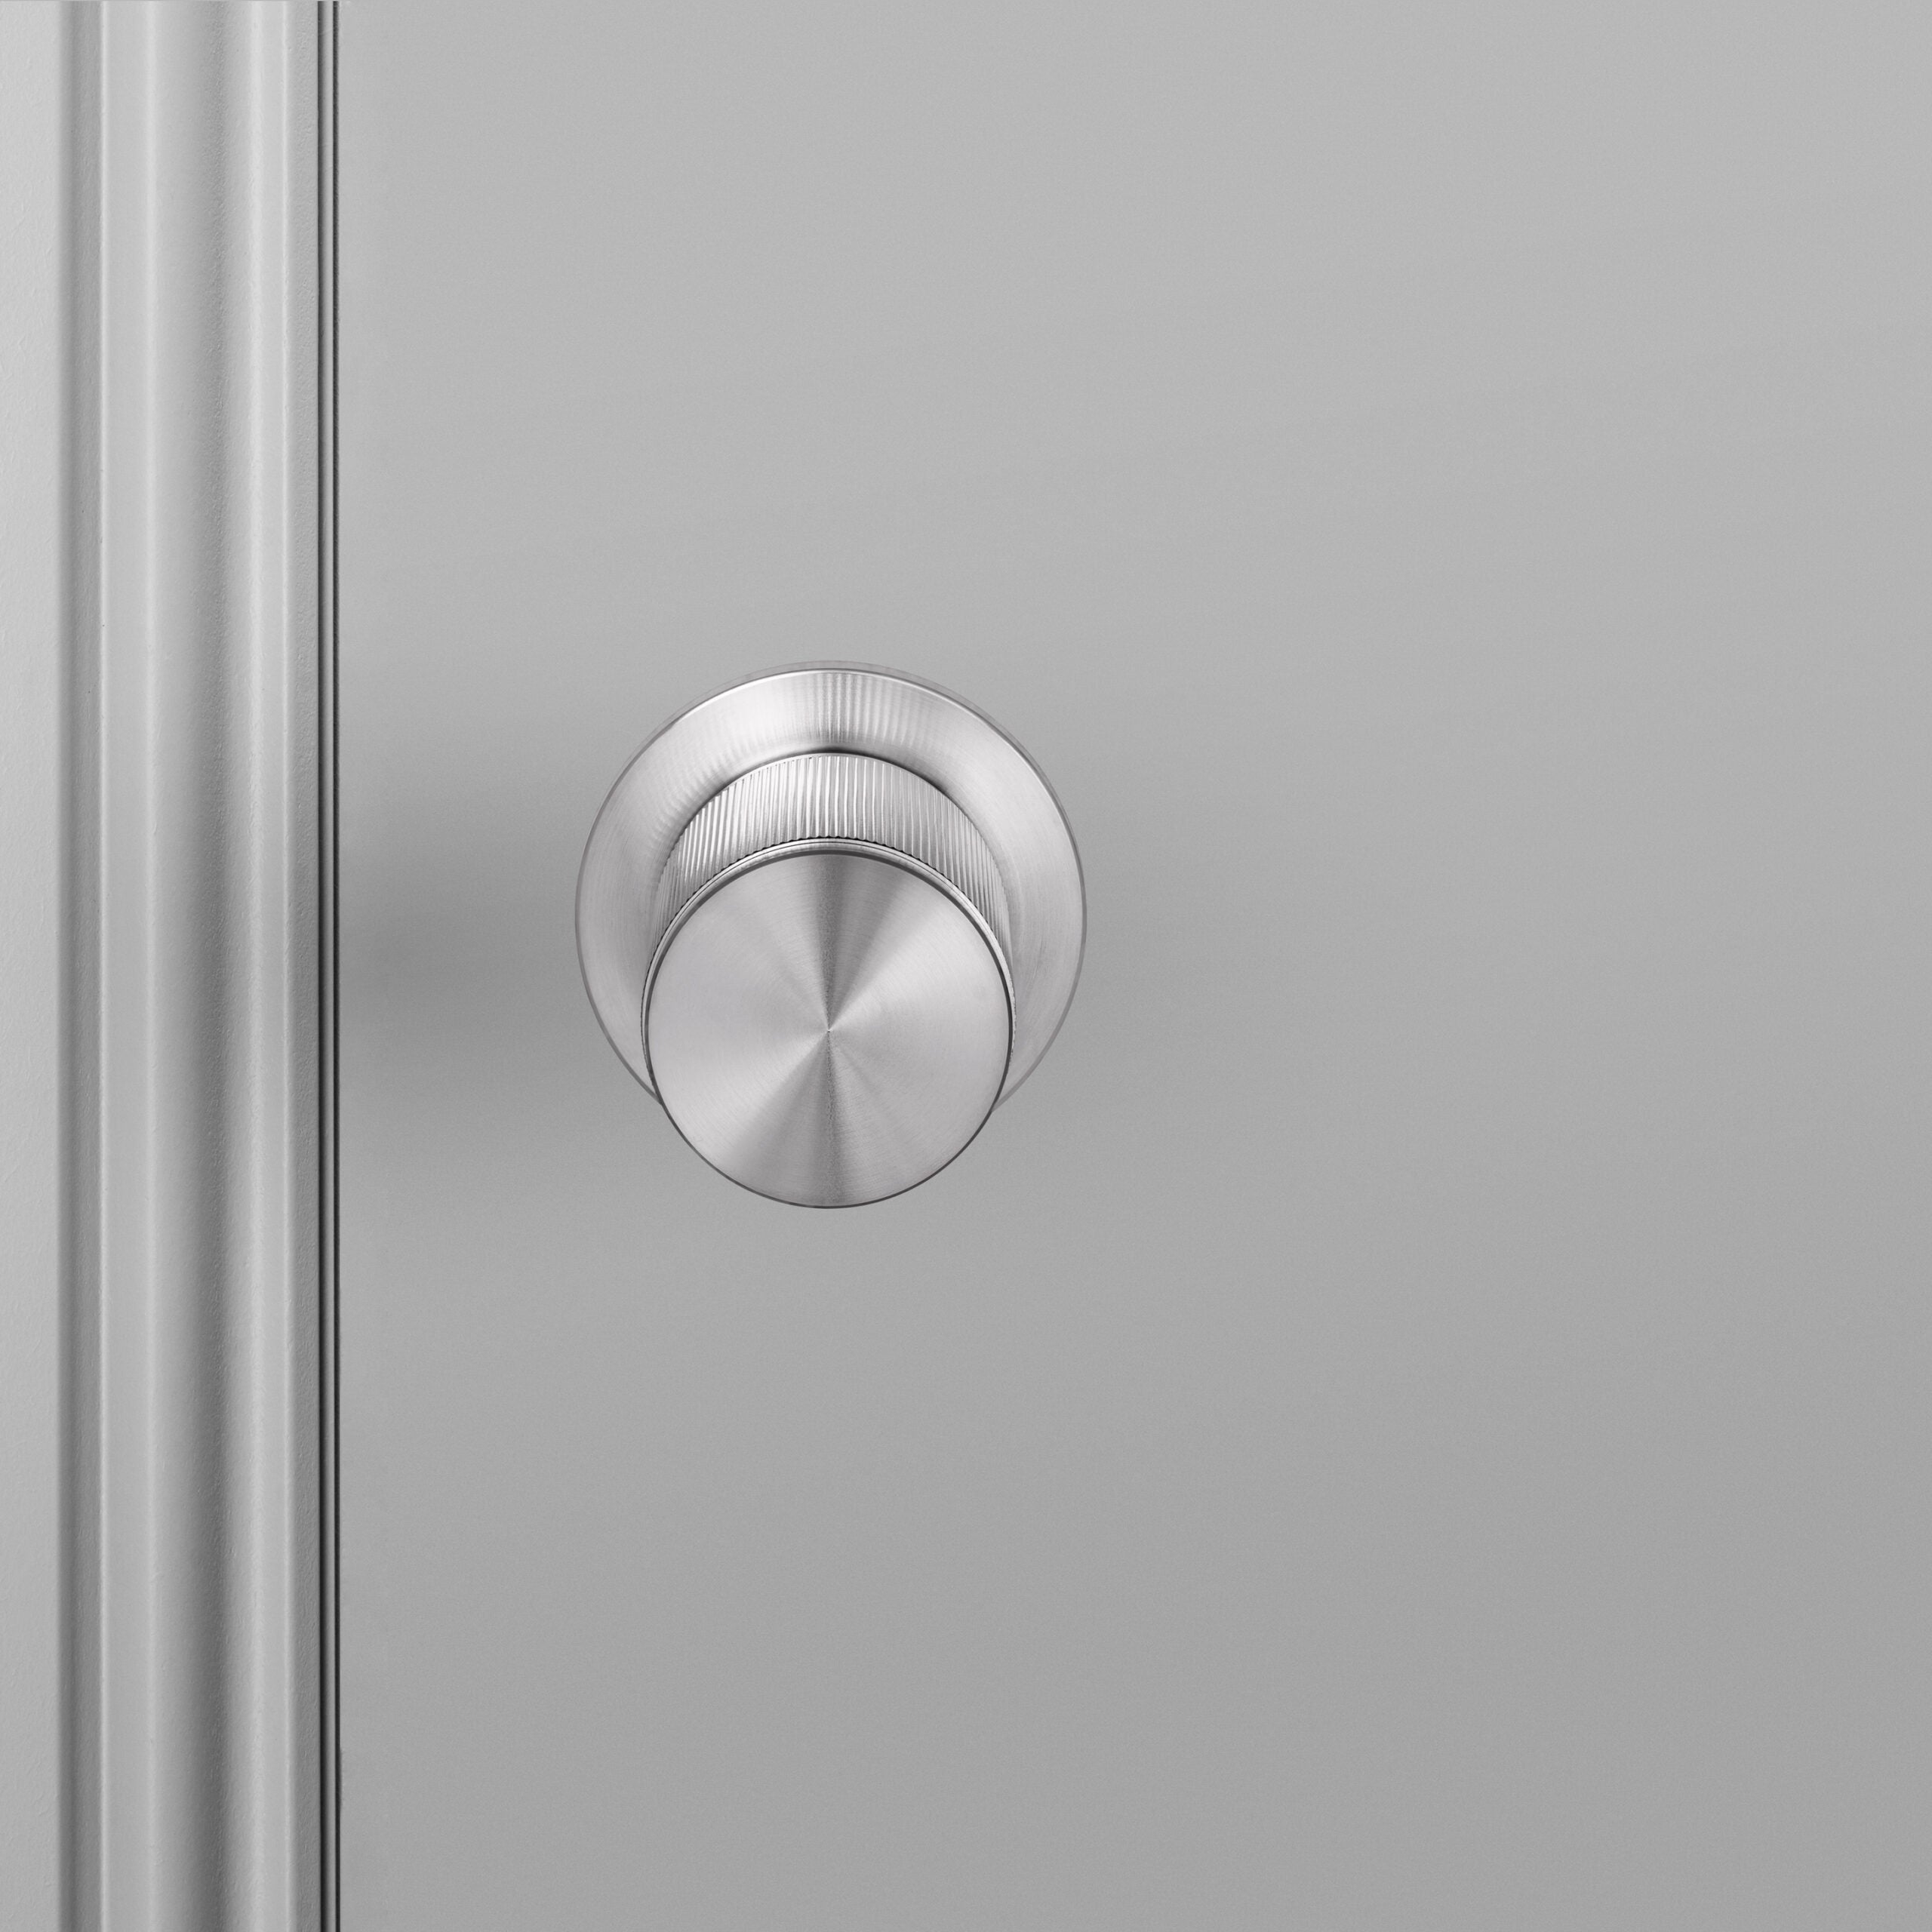 Buster + Punch Door Knob Double Sided, Linear Design, FIXED TYPE Hardware Buster + Punch Steel  